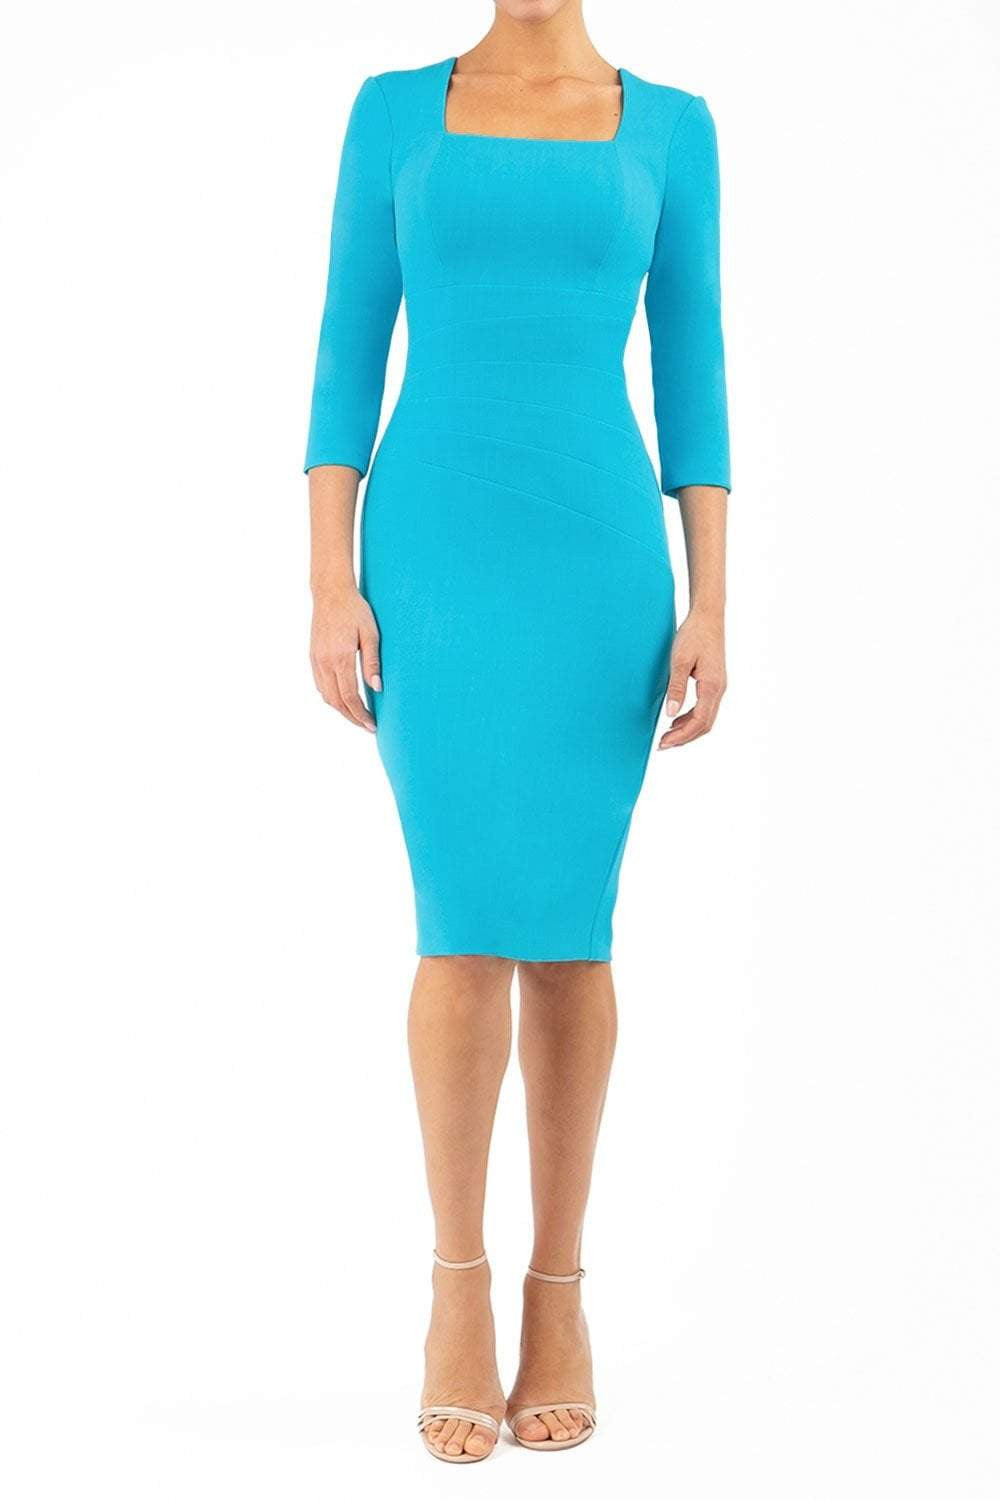 blond model wearing diva catwalk nashville plain pencil skirt dress with sleeves and square neckline and Empire waistline in royal blue colour front